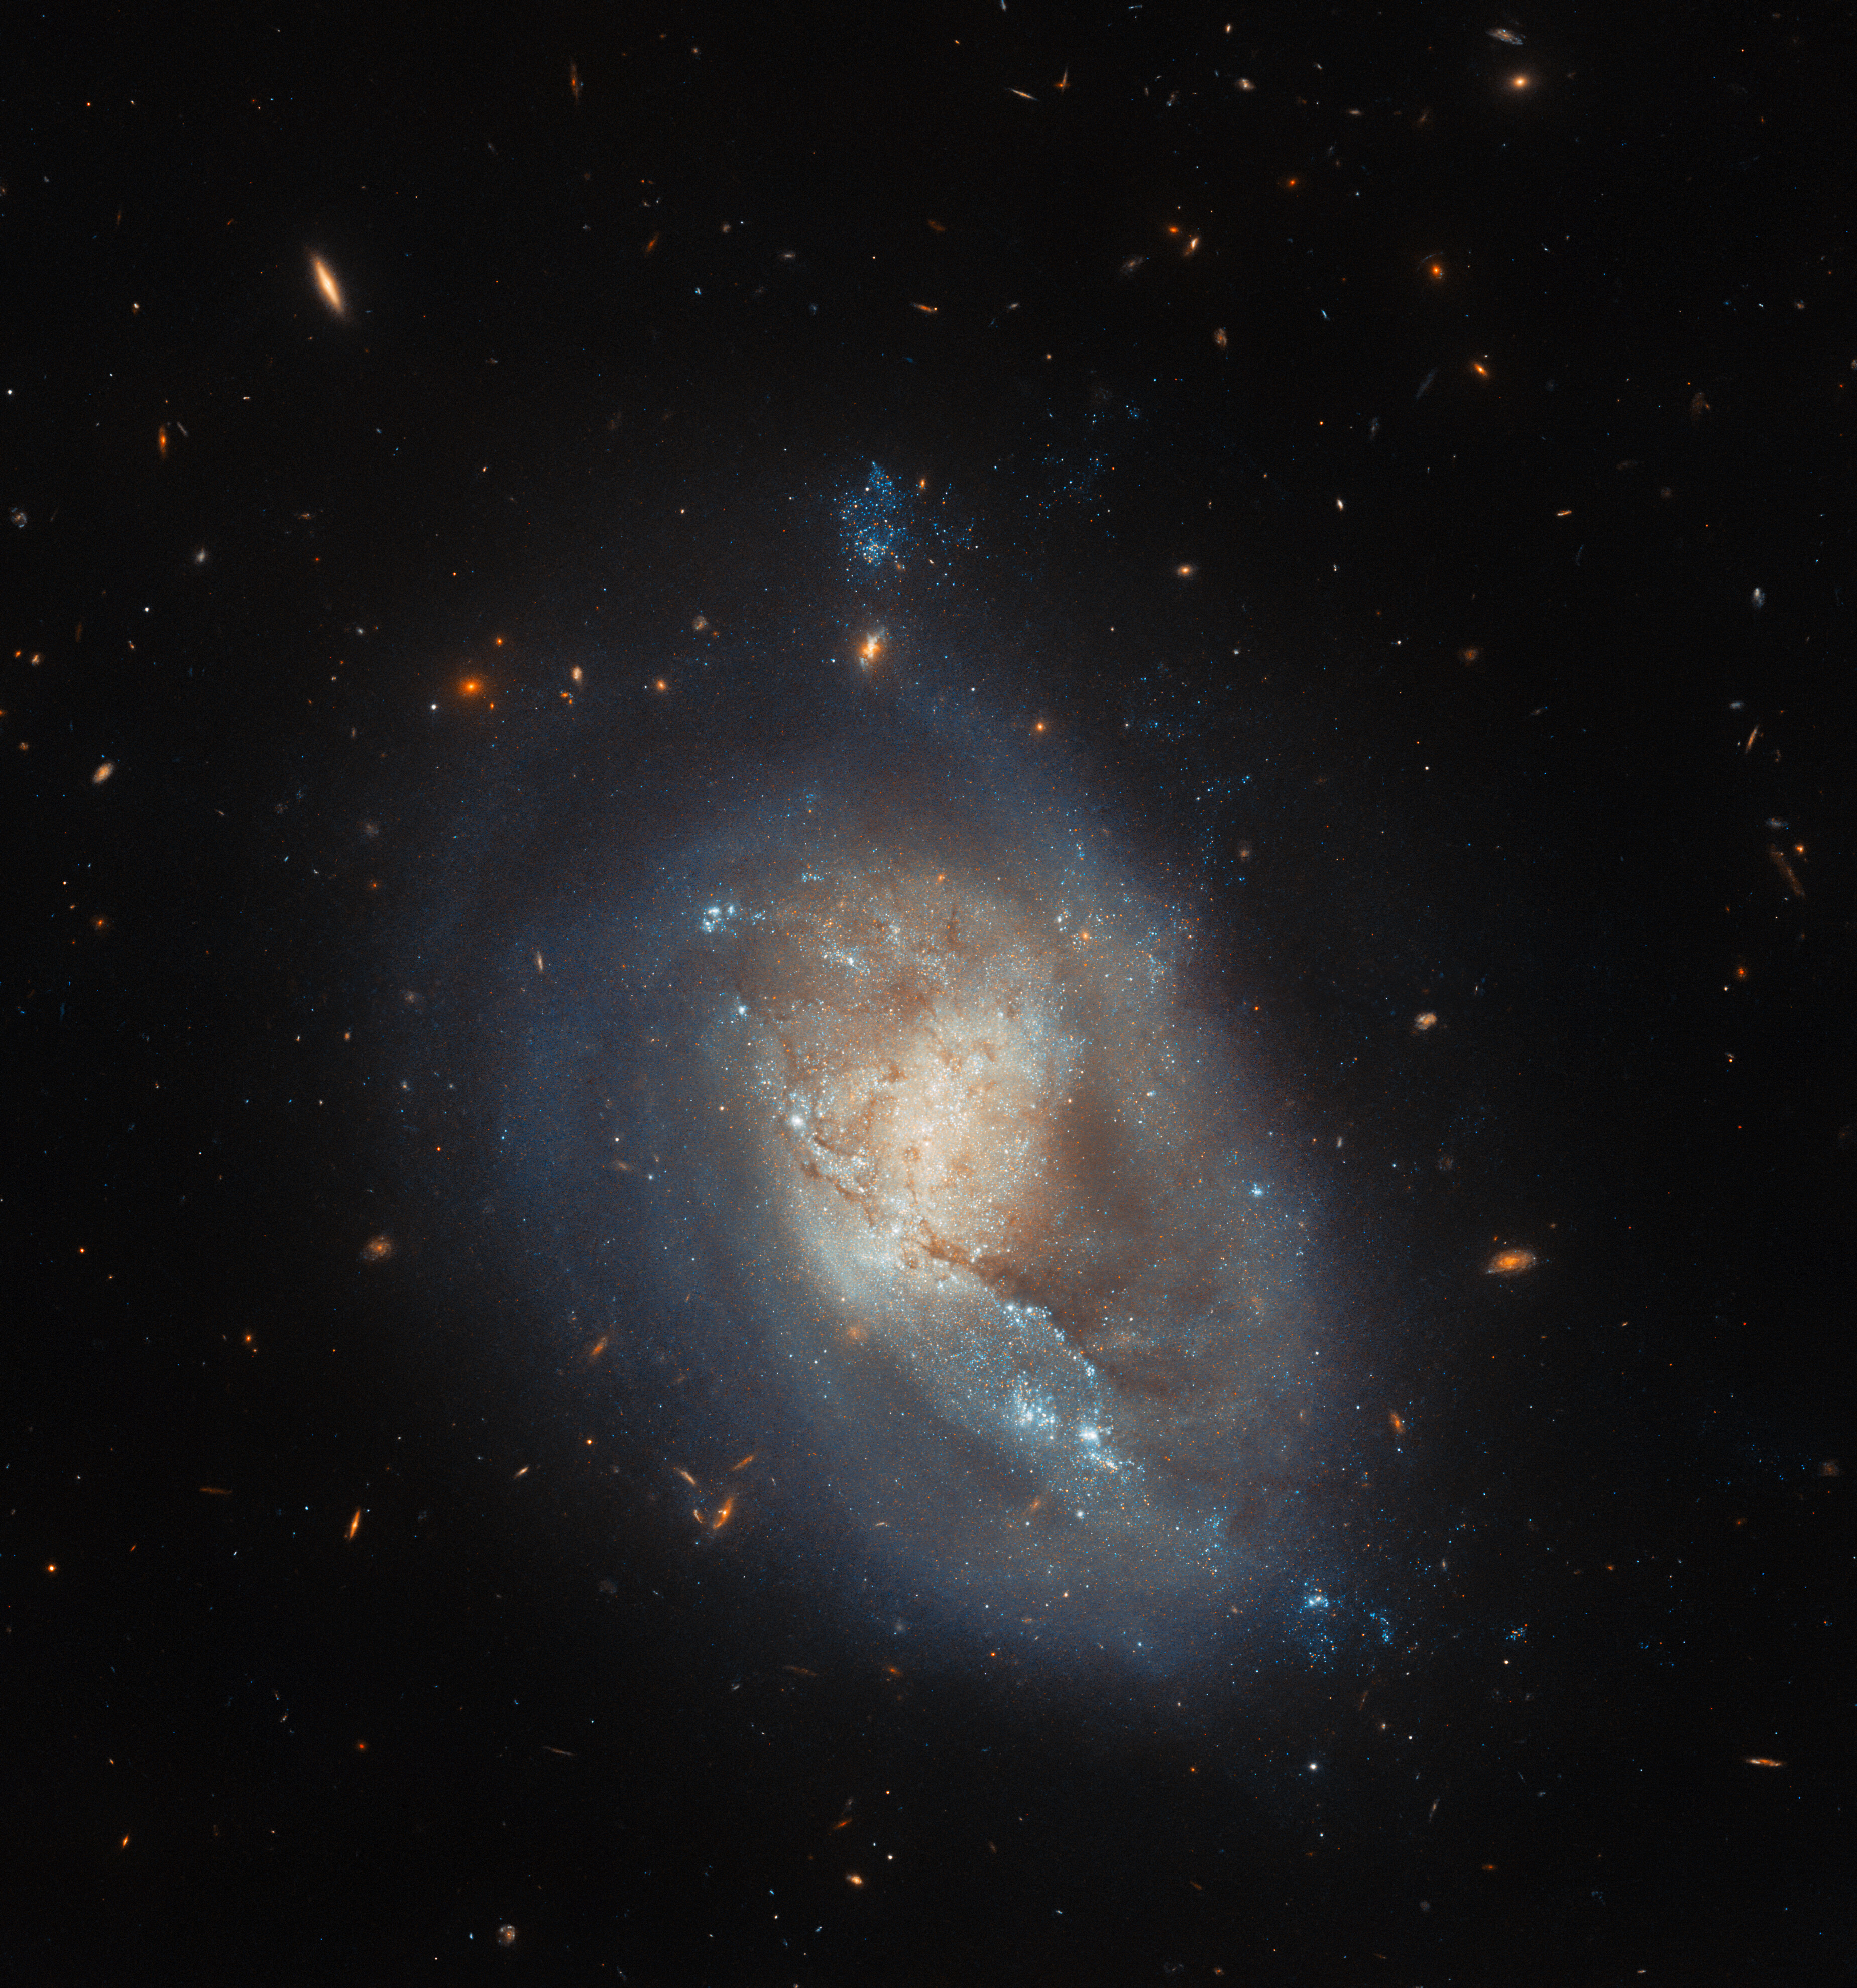 A dwarf spiral galaxy. The center is not particularly bright and is covered by some dust, while the outer disk and halo wrap around as if swirling in water. Across the face of the galaxy, an arc of brightly glowing spots marks areas where new stars are forming. The galaxy is surrounded by tiny, distant galaxies on a dark background.